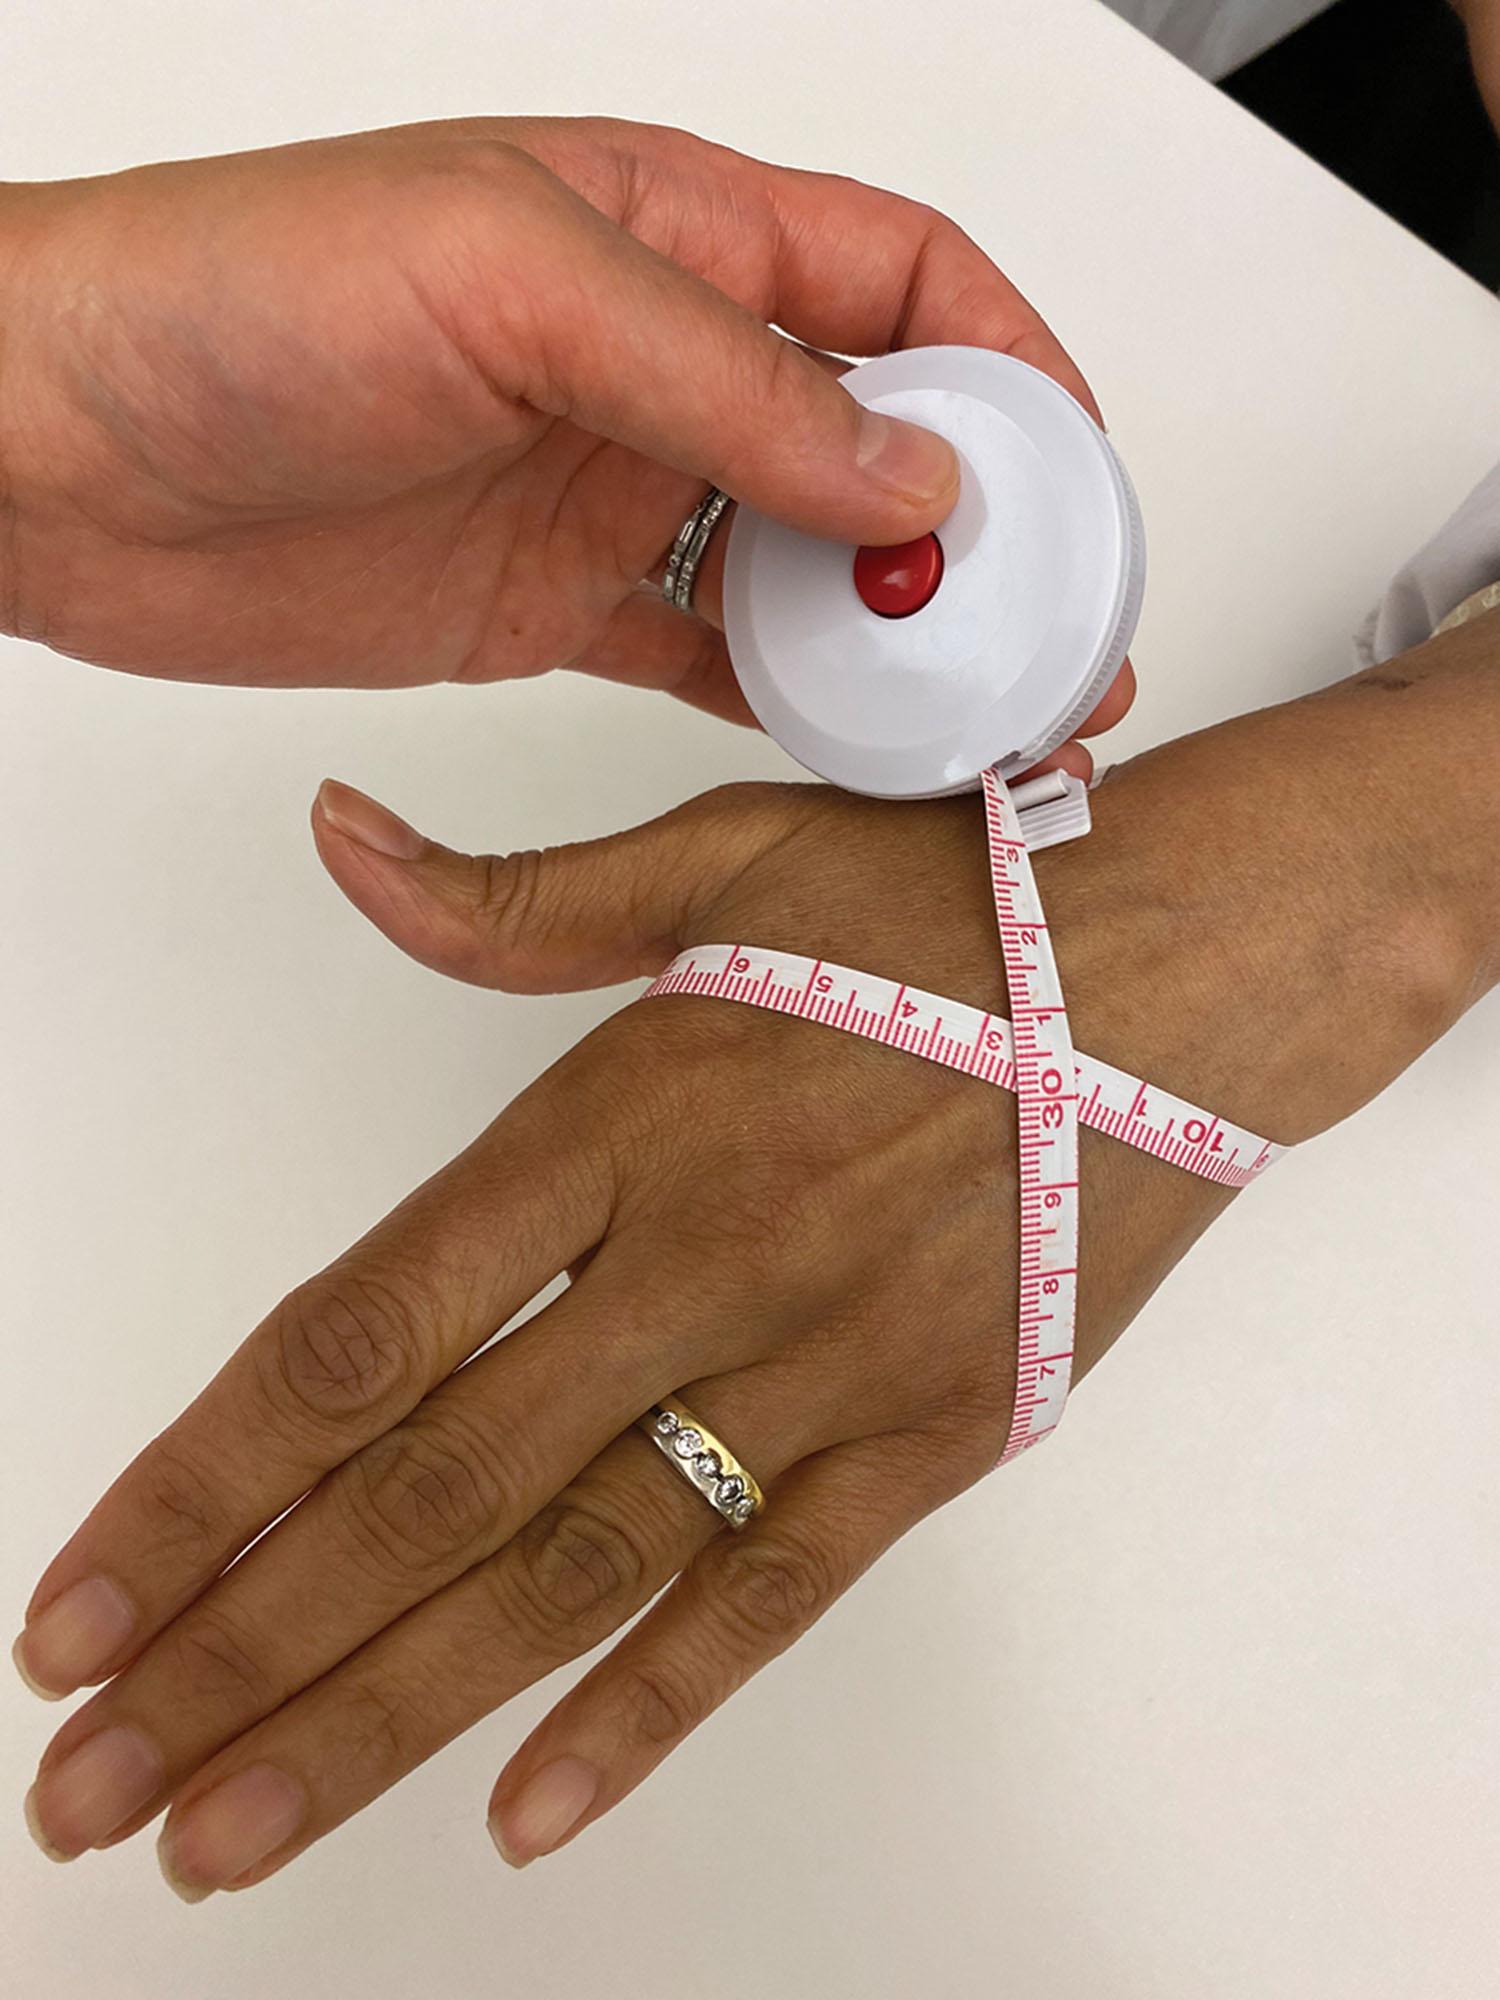 Figure 43.1, The figure-of-eight measurement technique for assessing edema is performed using a tape measure that is started at the base of the scaphoid and wrapped ulnar across the distal wrist crease, distal and oblique across the dorsum of the hand toward the second metacarpal, along the palmar digital crease in an ulnar direction to the fifth digit and back across the dorsum of the hand to the starting point.